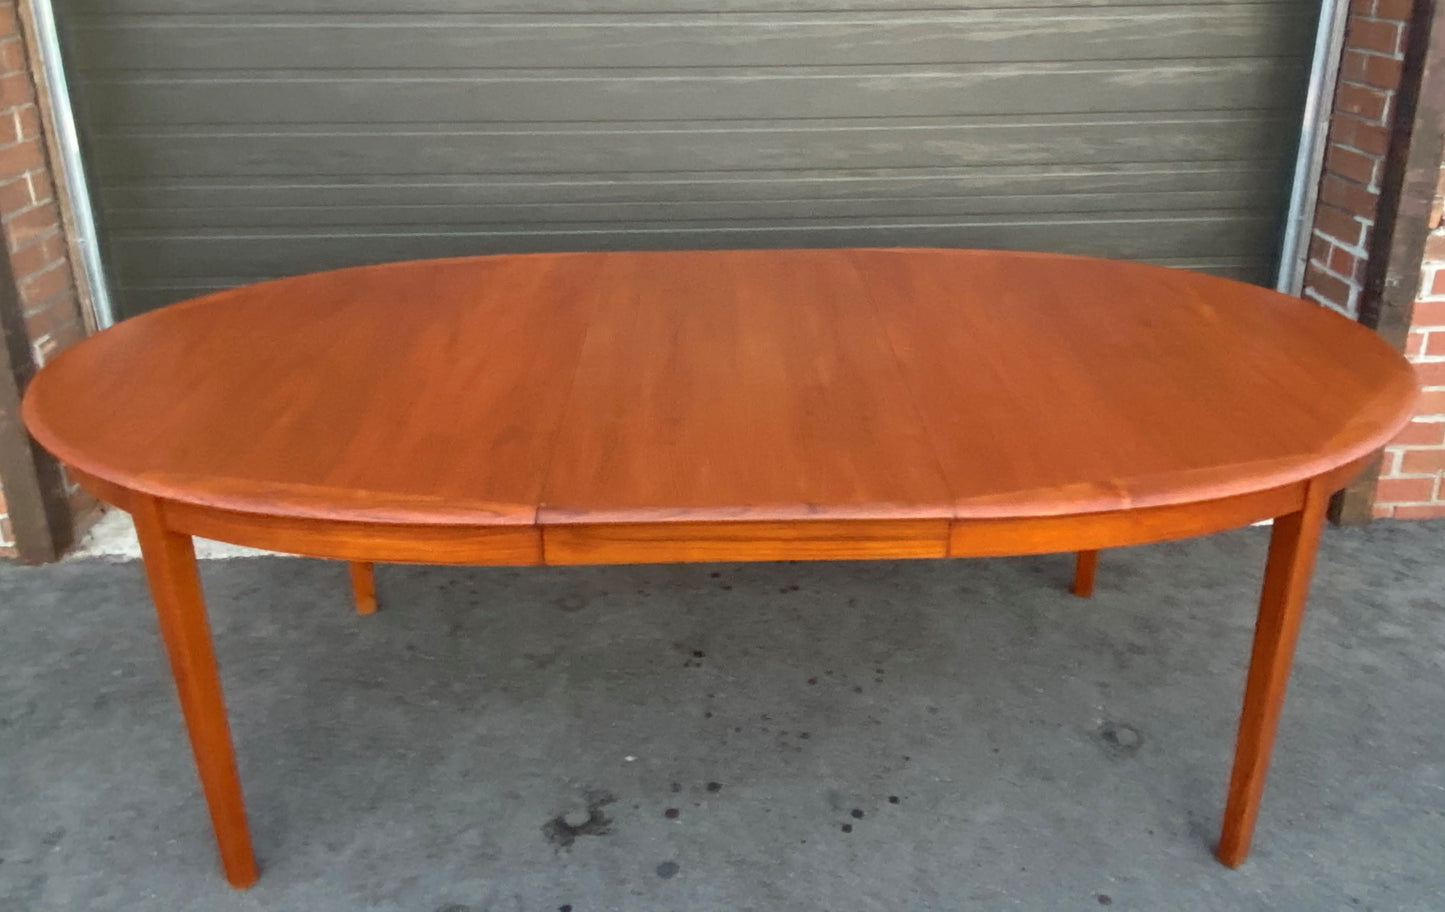 REFINISHED Danish MCM Teak Dining Table w 2 Leaves by A.H.Olsen, PERFECT, 64" - 103"